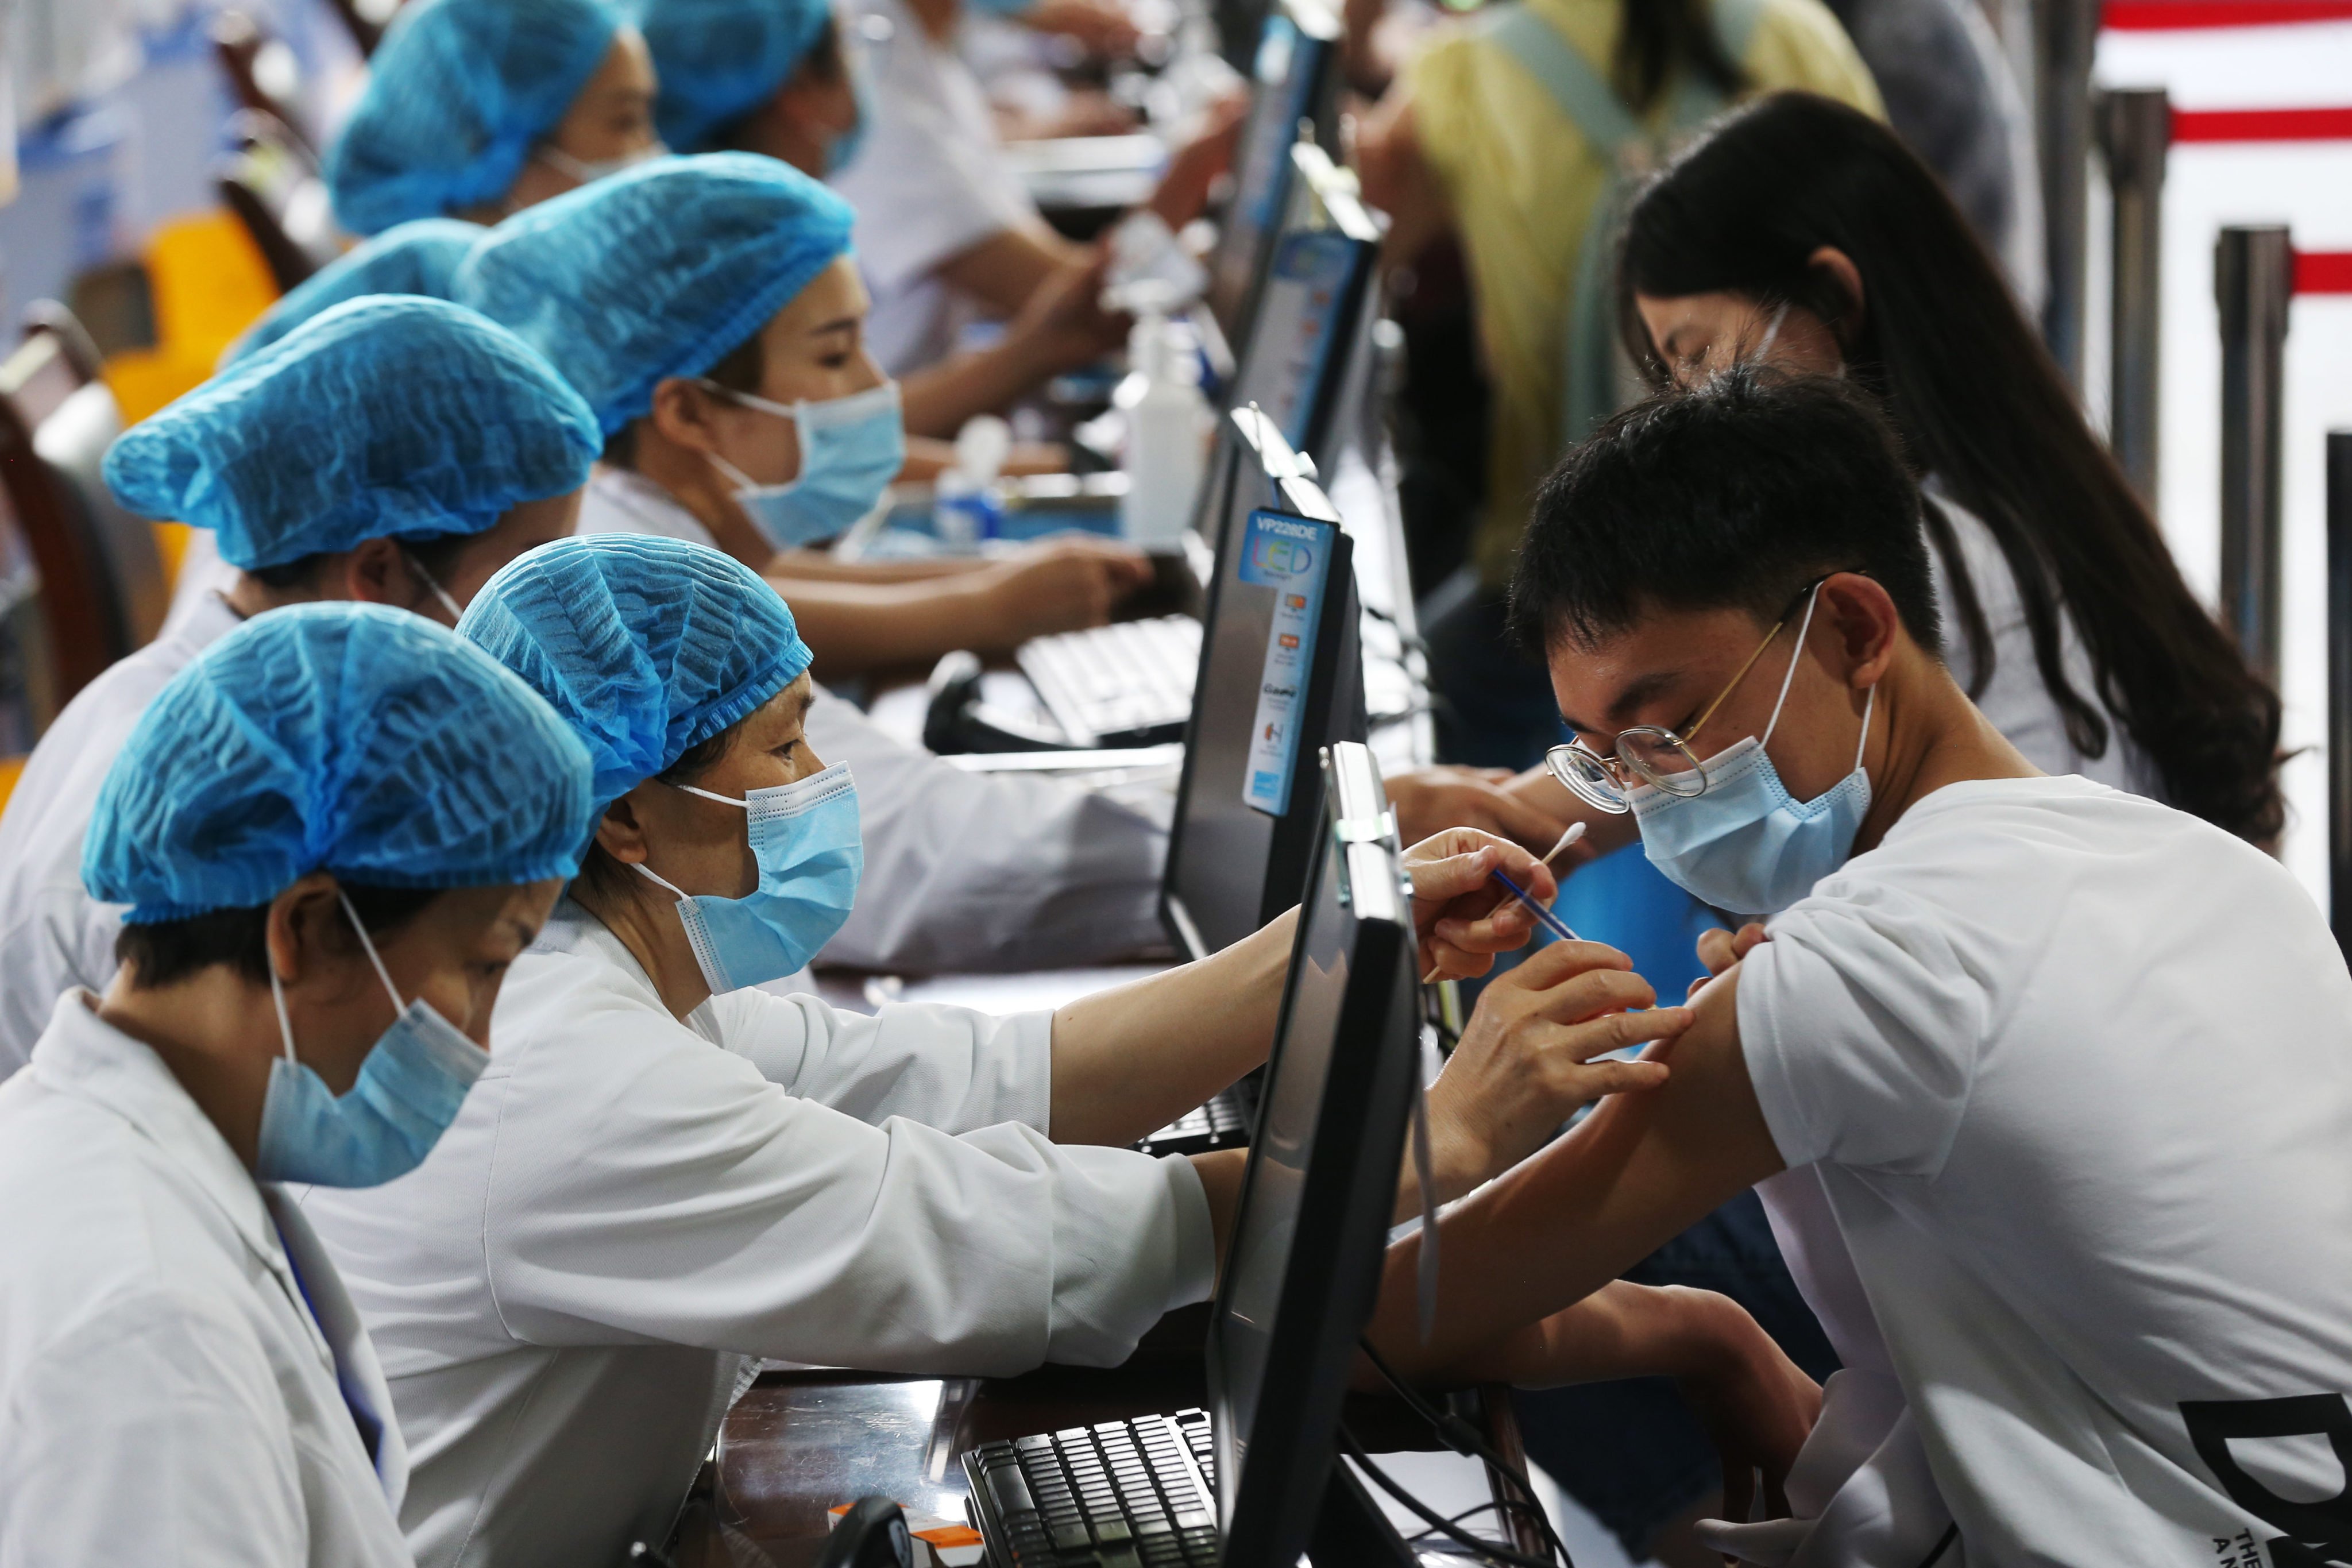 China says it spent 150 billion yuan in 2021 and 2022 buying vaccines and inoculating its population. Photo: DPA